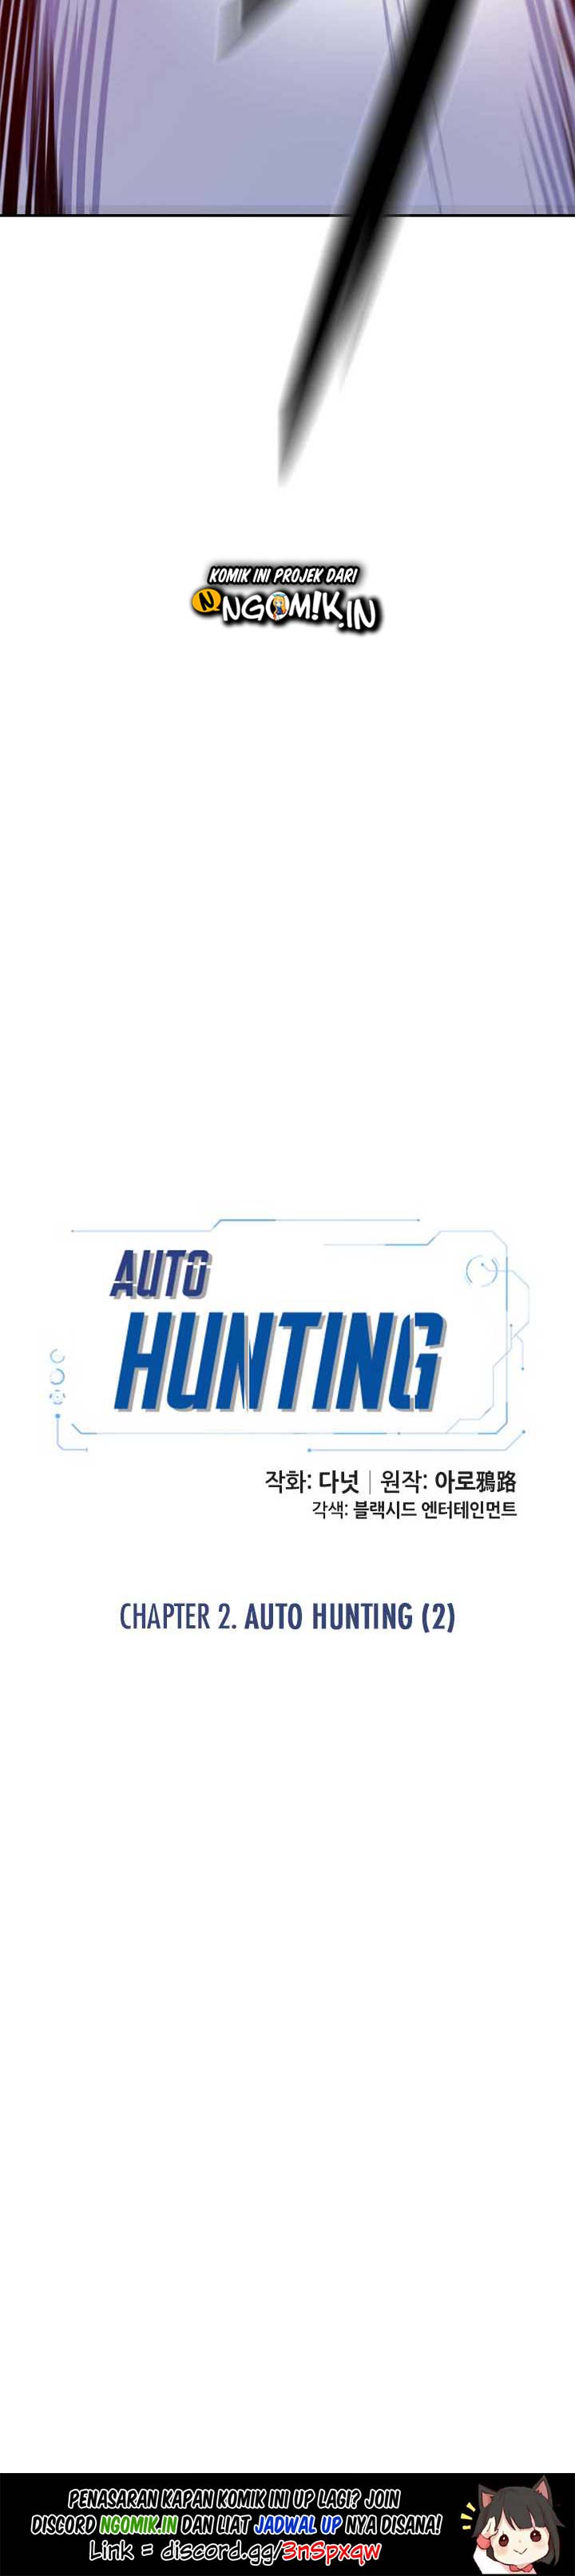 Auto Hunting Chapter 2